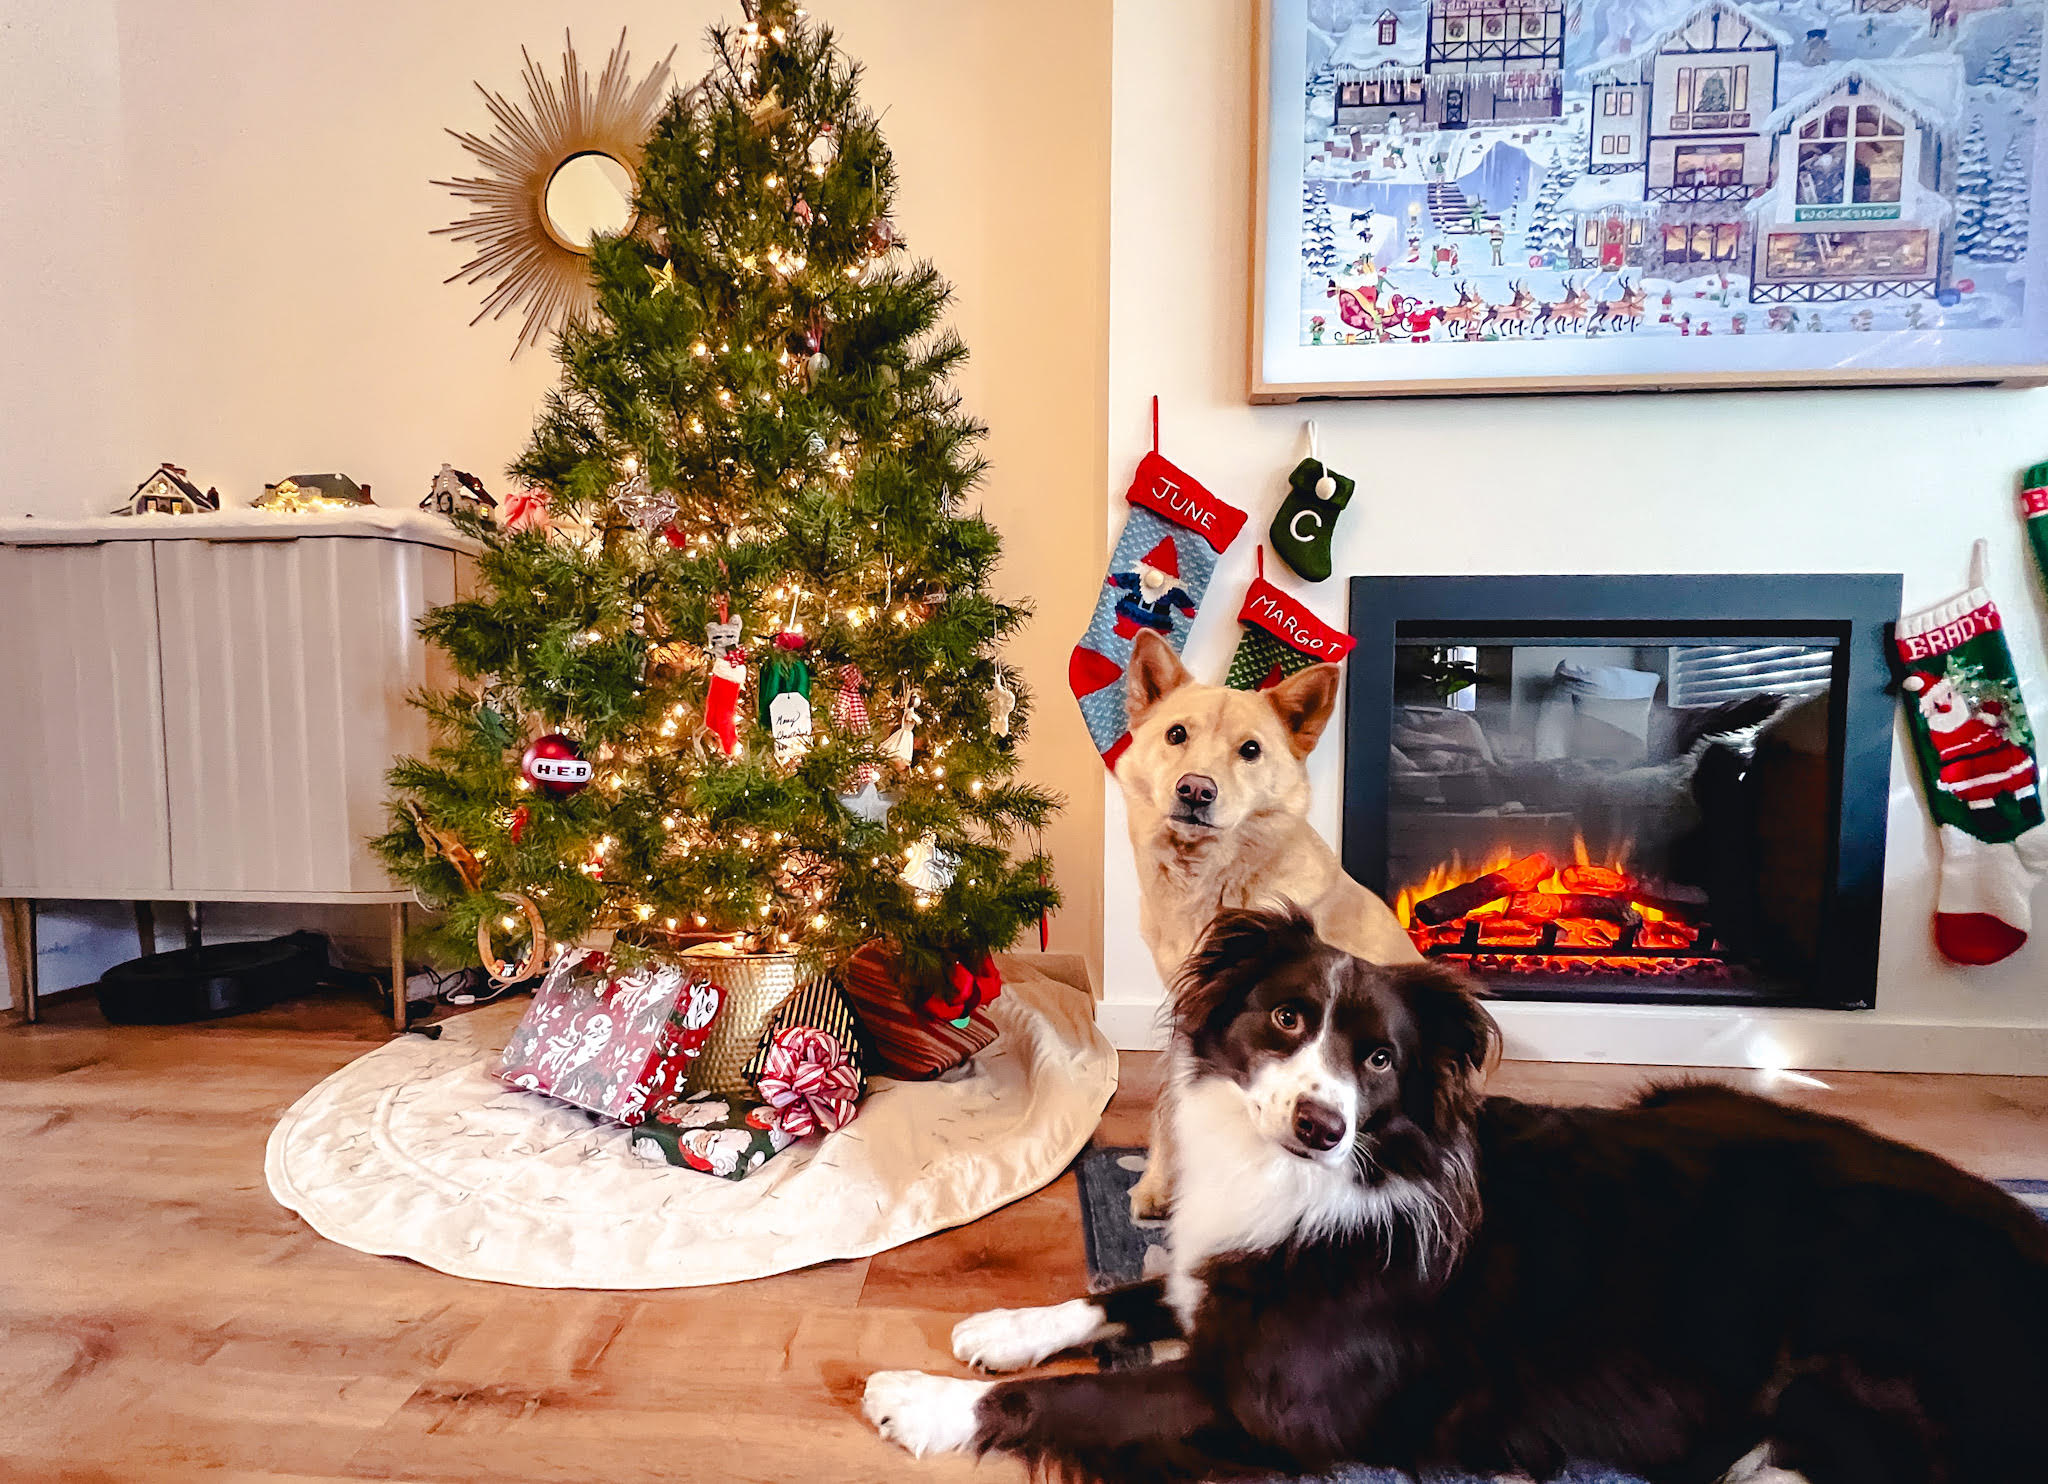 June and Margot, two dogs, pose in front of a live Christmas tree and electric fireplace.